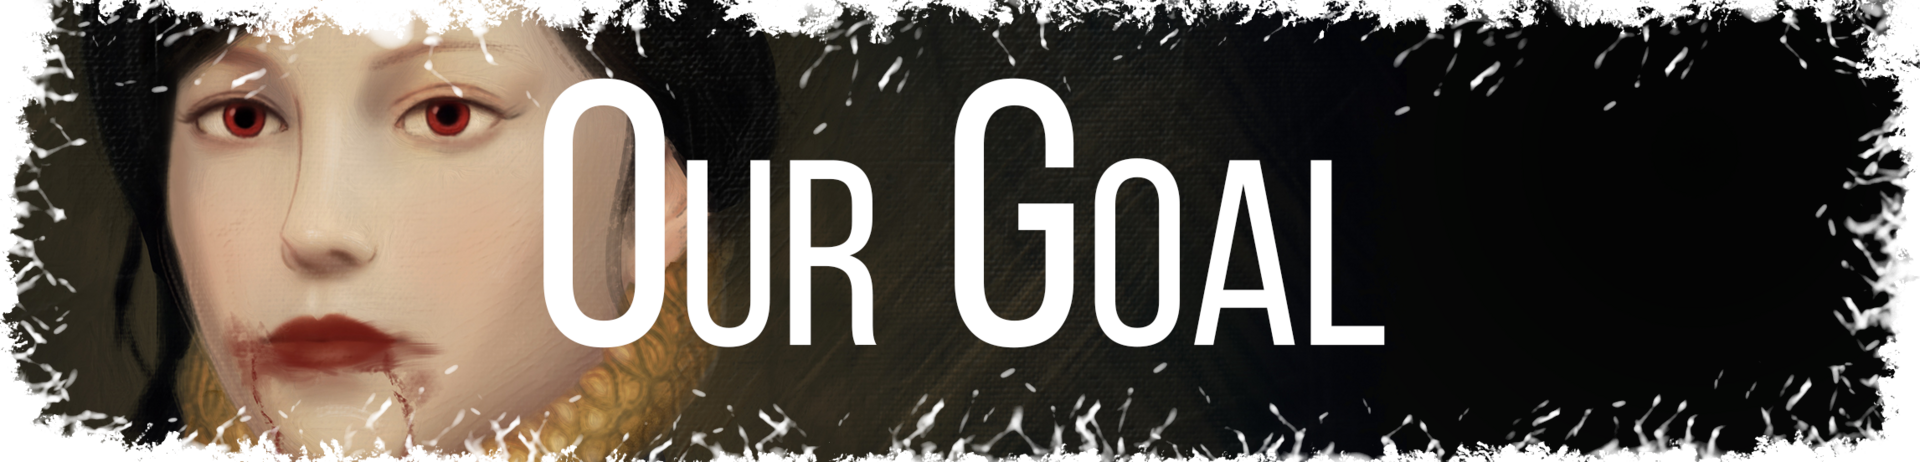 label_OurGoal.thumb.png.31c4965bdbae3101f4f19f65f9a6703c.png